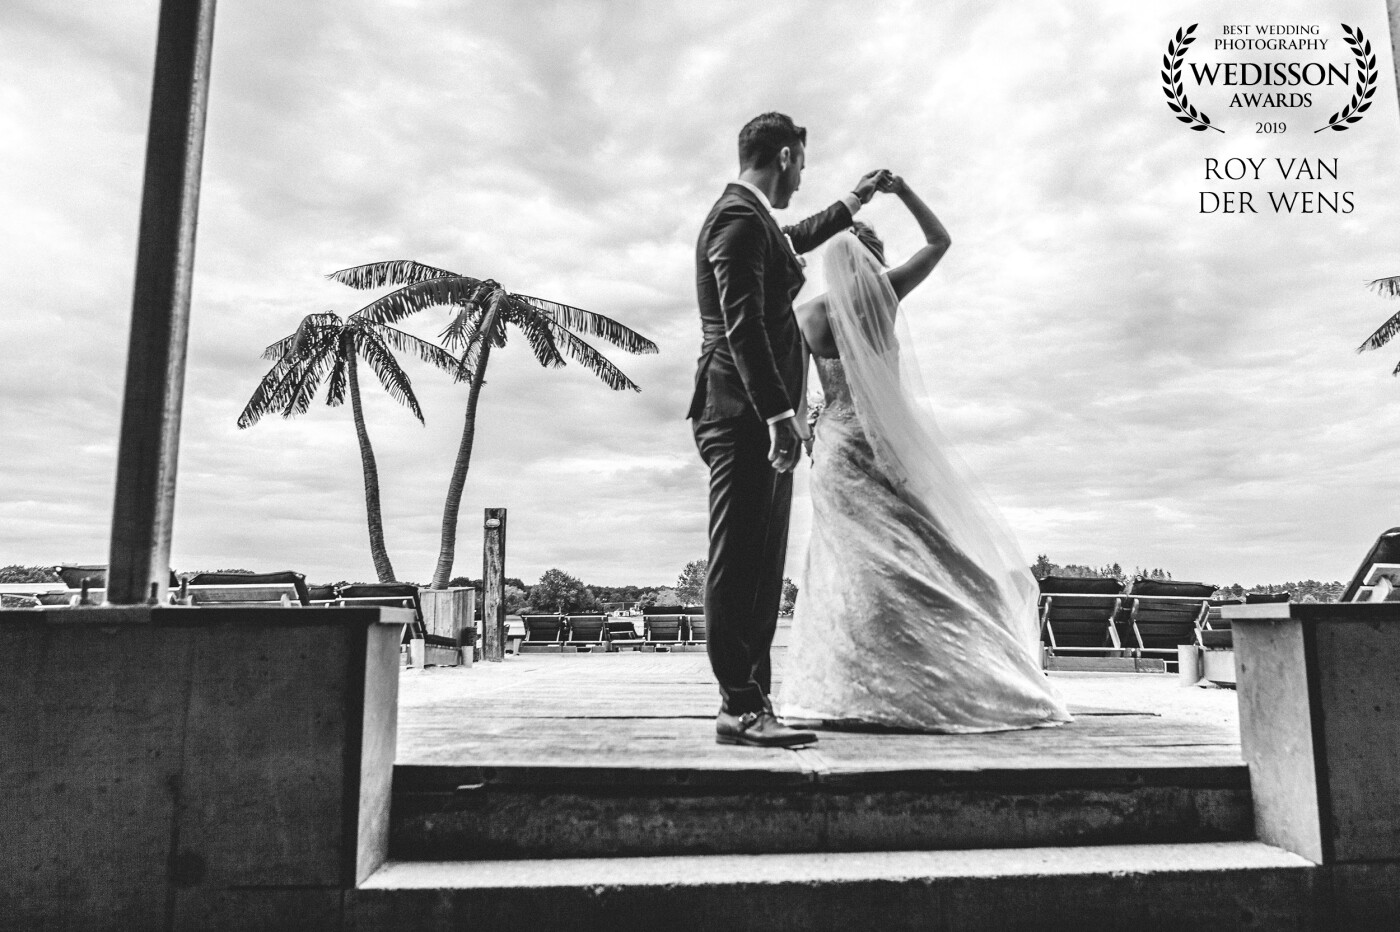 Beautiful bride and groom dancing on their wedding day at the beach. This photo was shot in black and white because it made the attention of the moment shift completely to the dancing bride and groom.